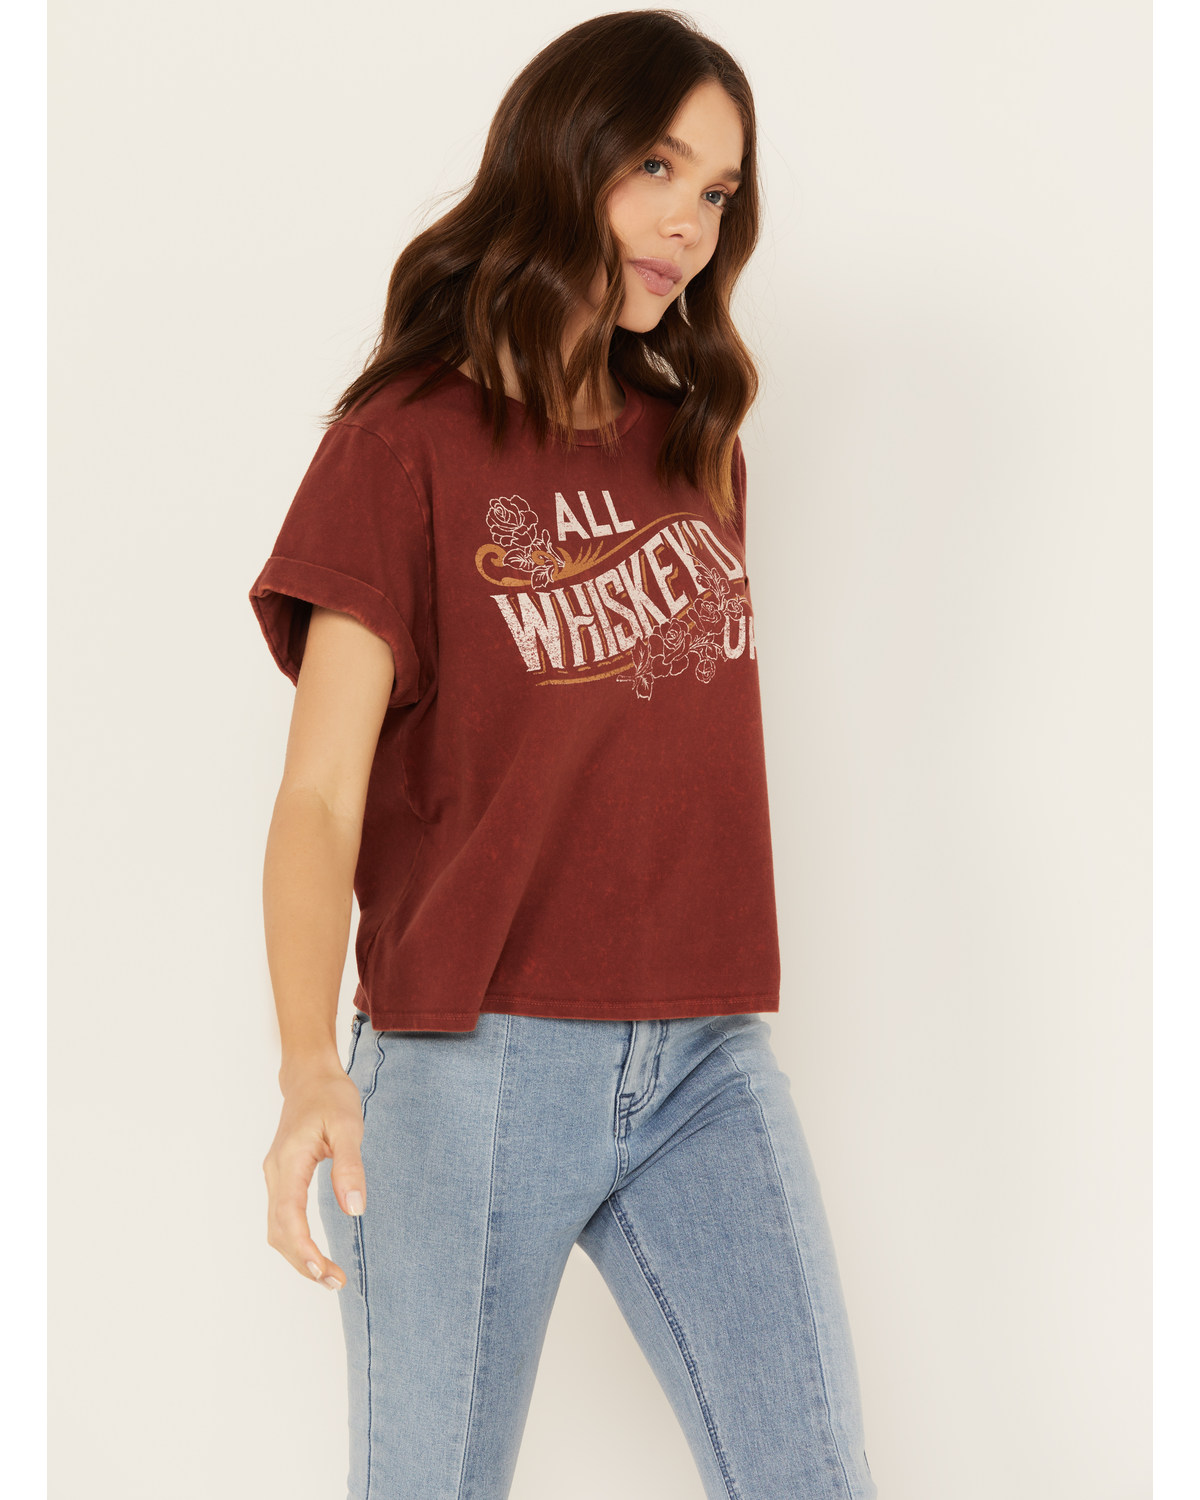 Youth Revolt Women's All Whiskey'd Up Short Sleeve Graphic Tee